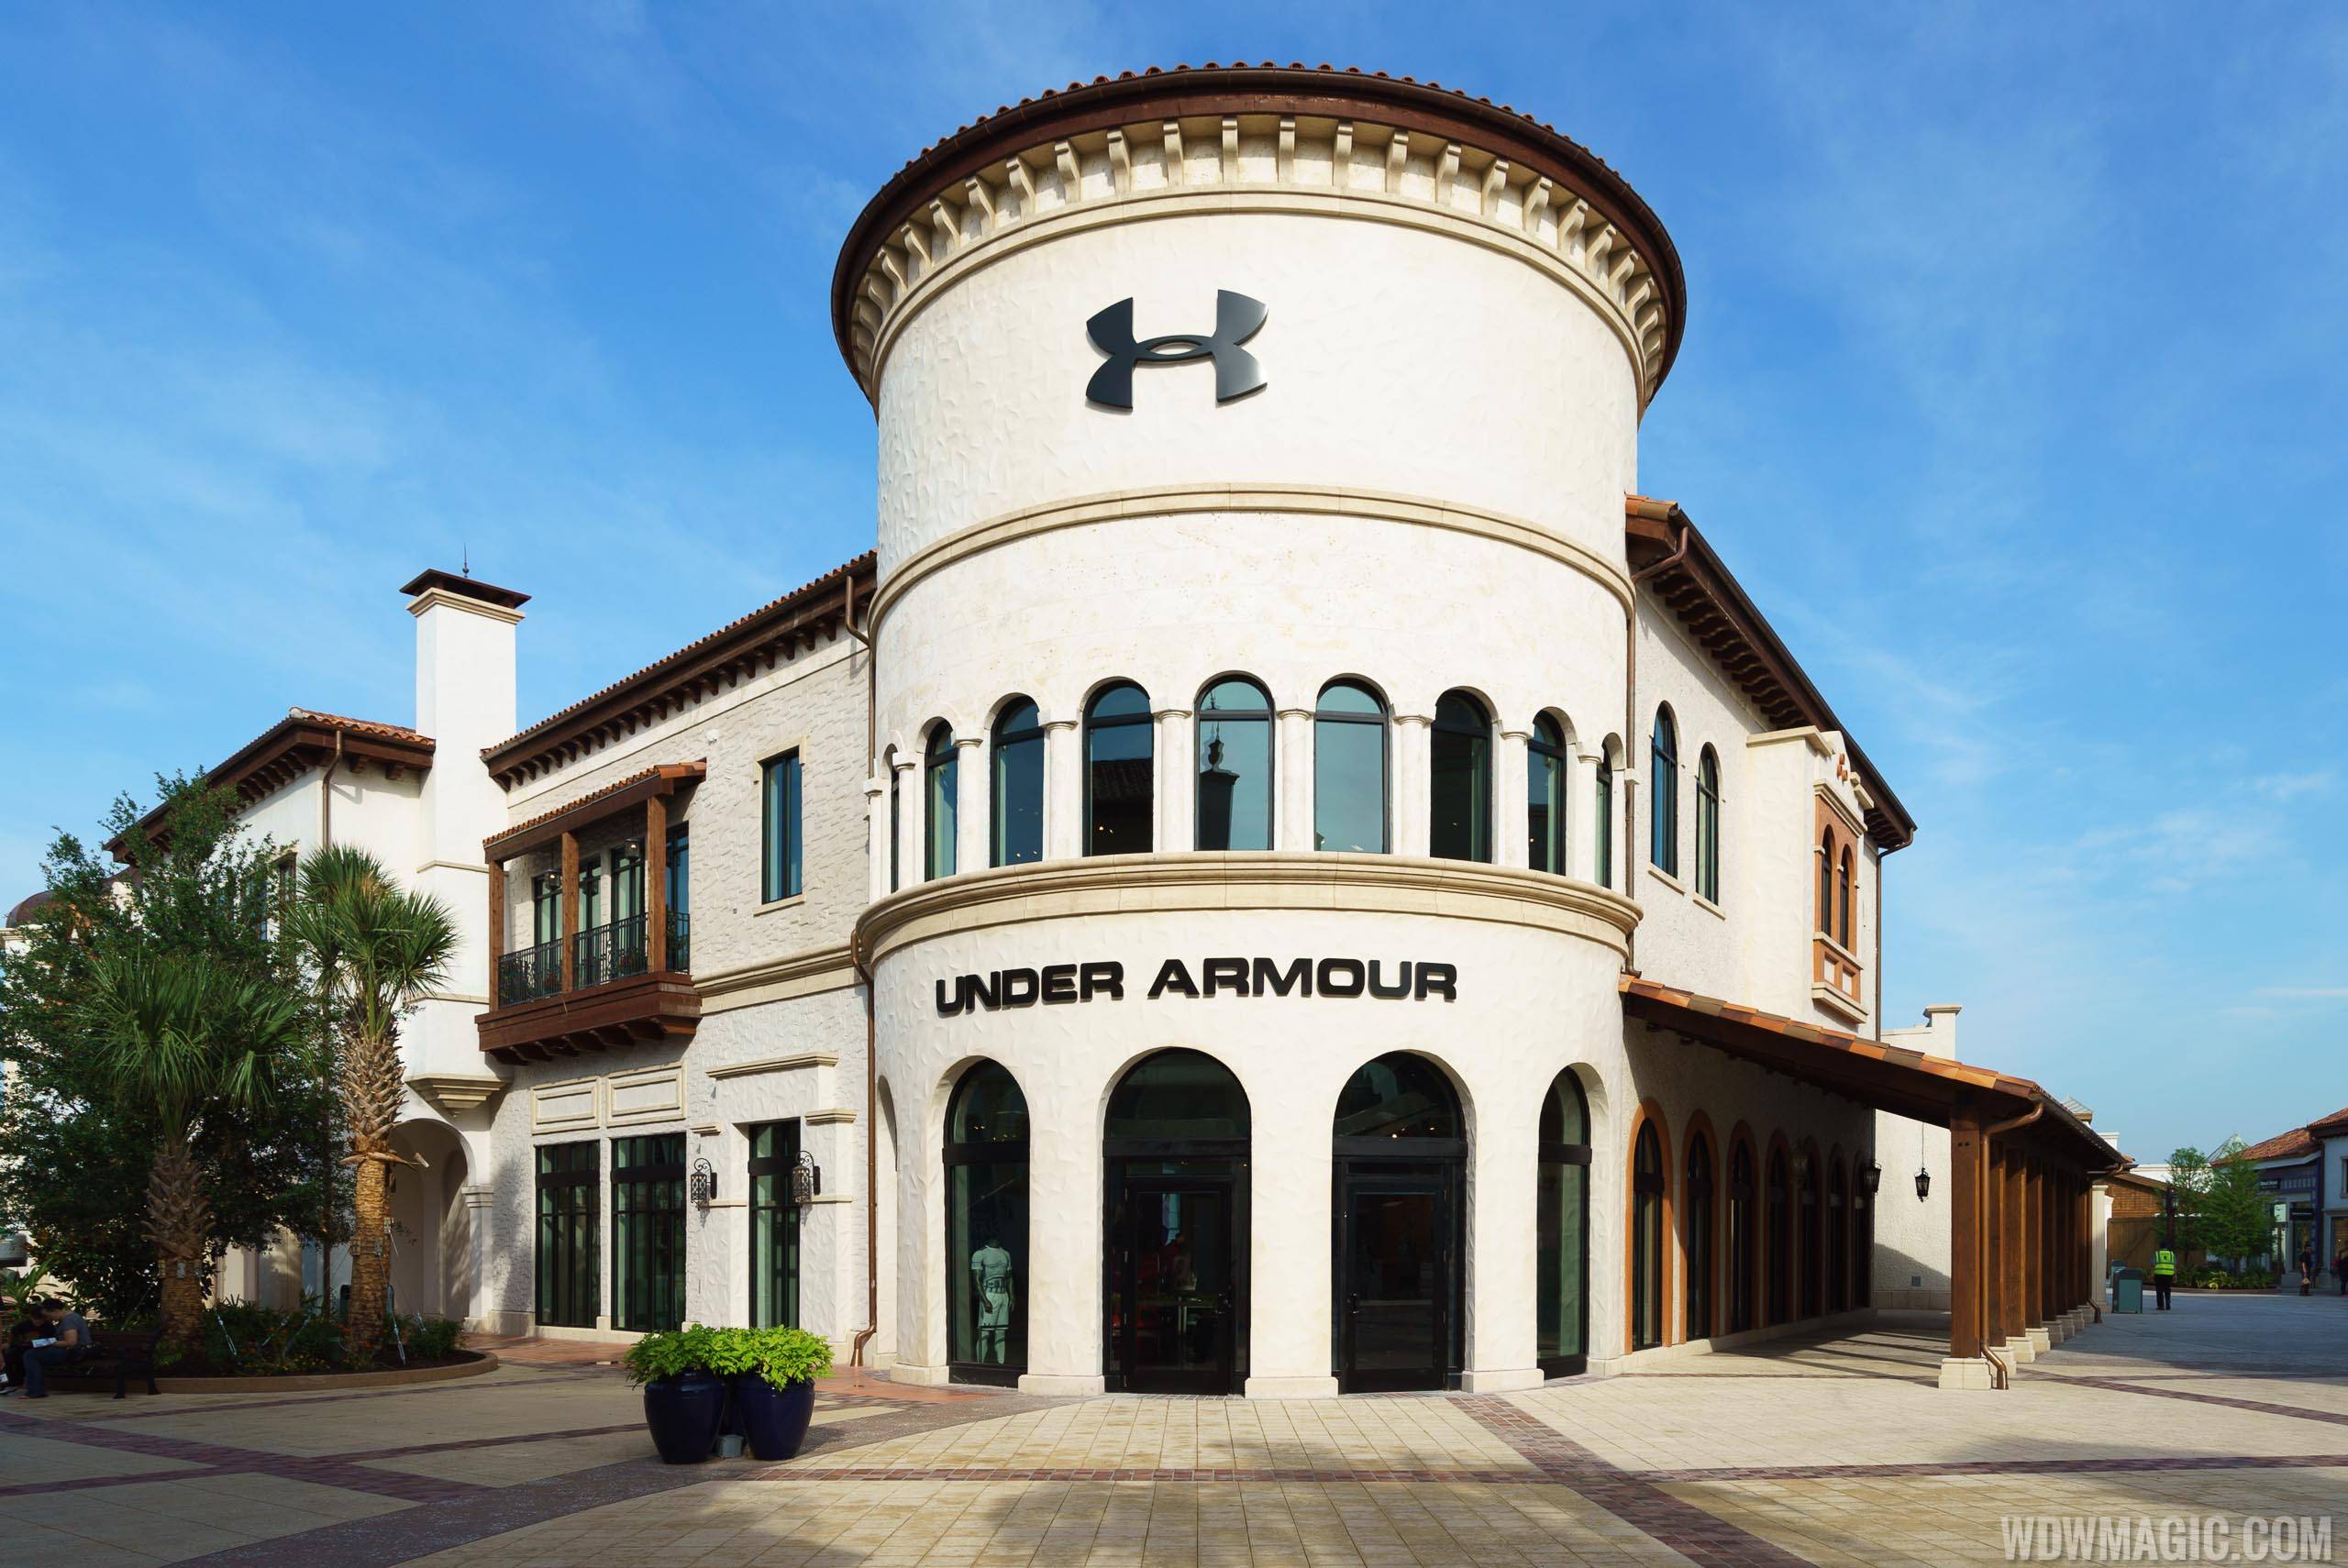 Under Armour overview